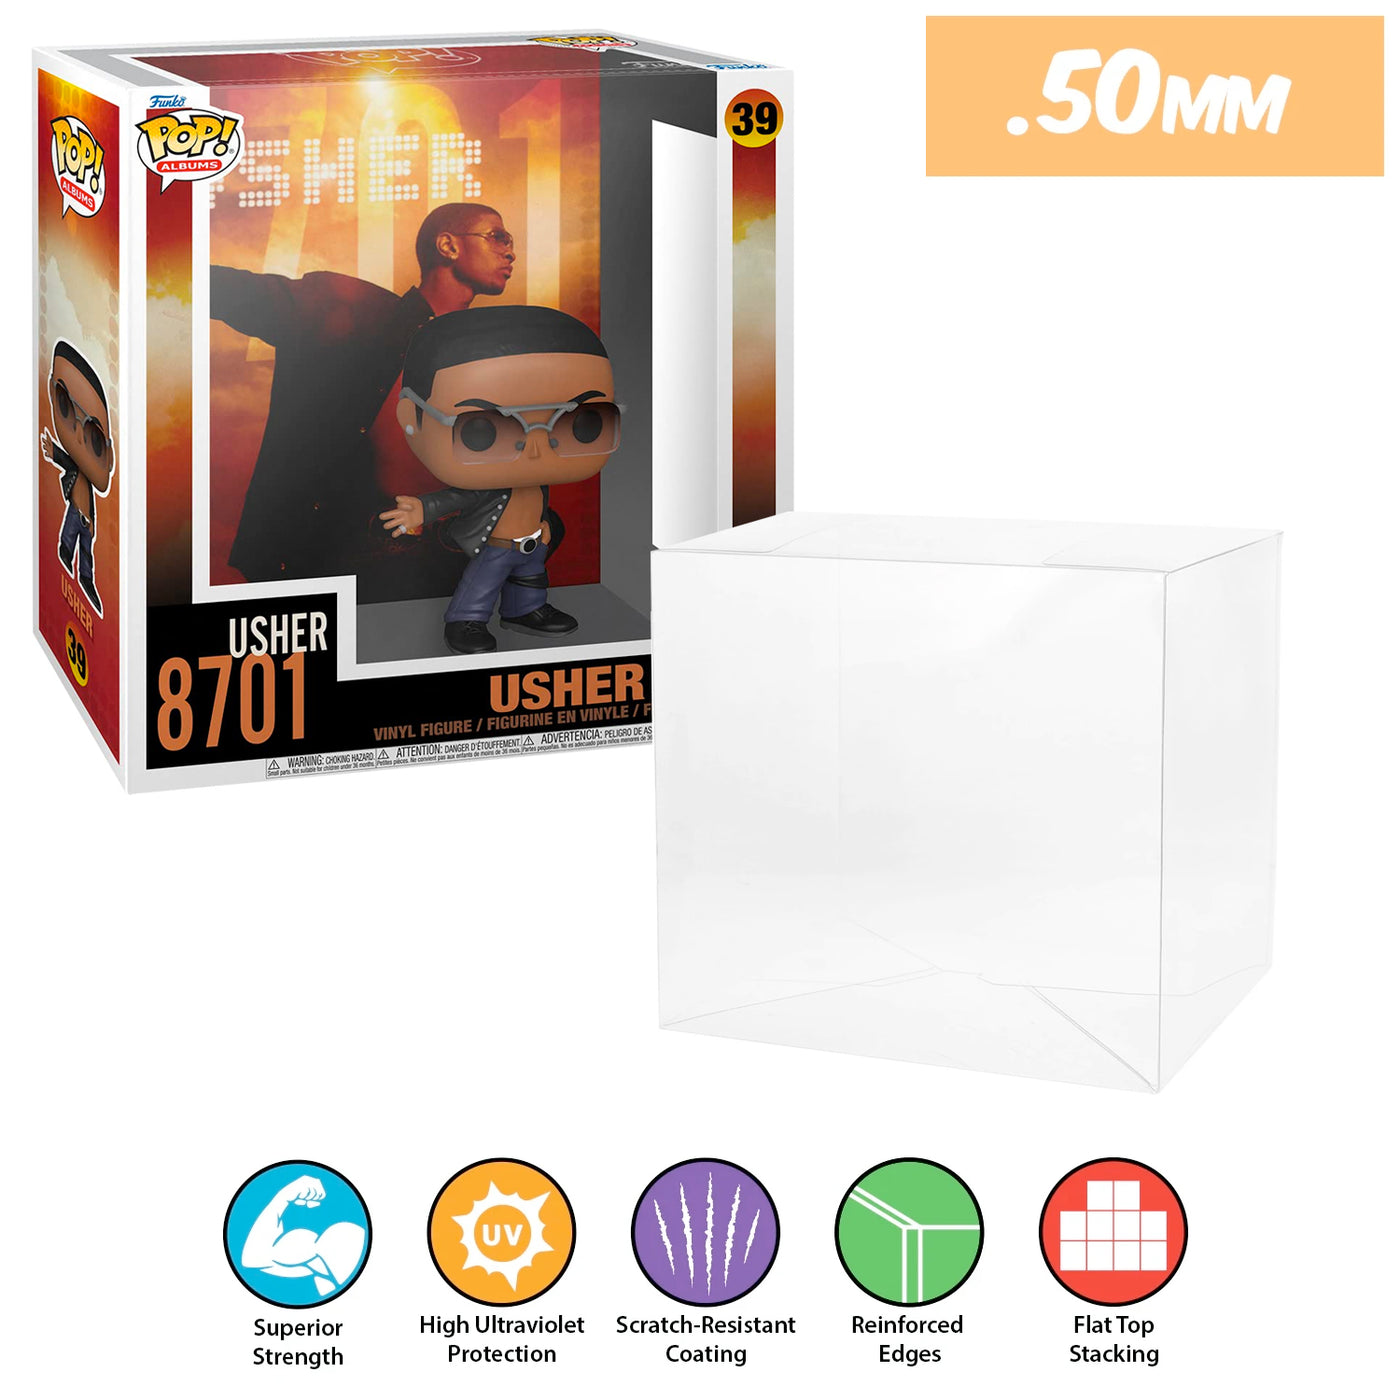 39 usher 8701 pop albums best funko pop protectors thick strong uv scratch flat top stack vinyl display geek plastic shield vaulted eco armor fits collect protect display case kollector protector